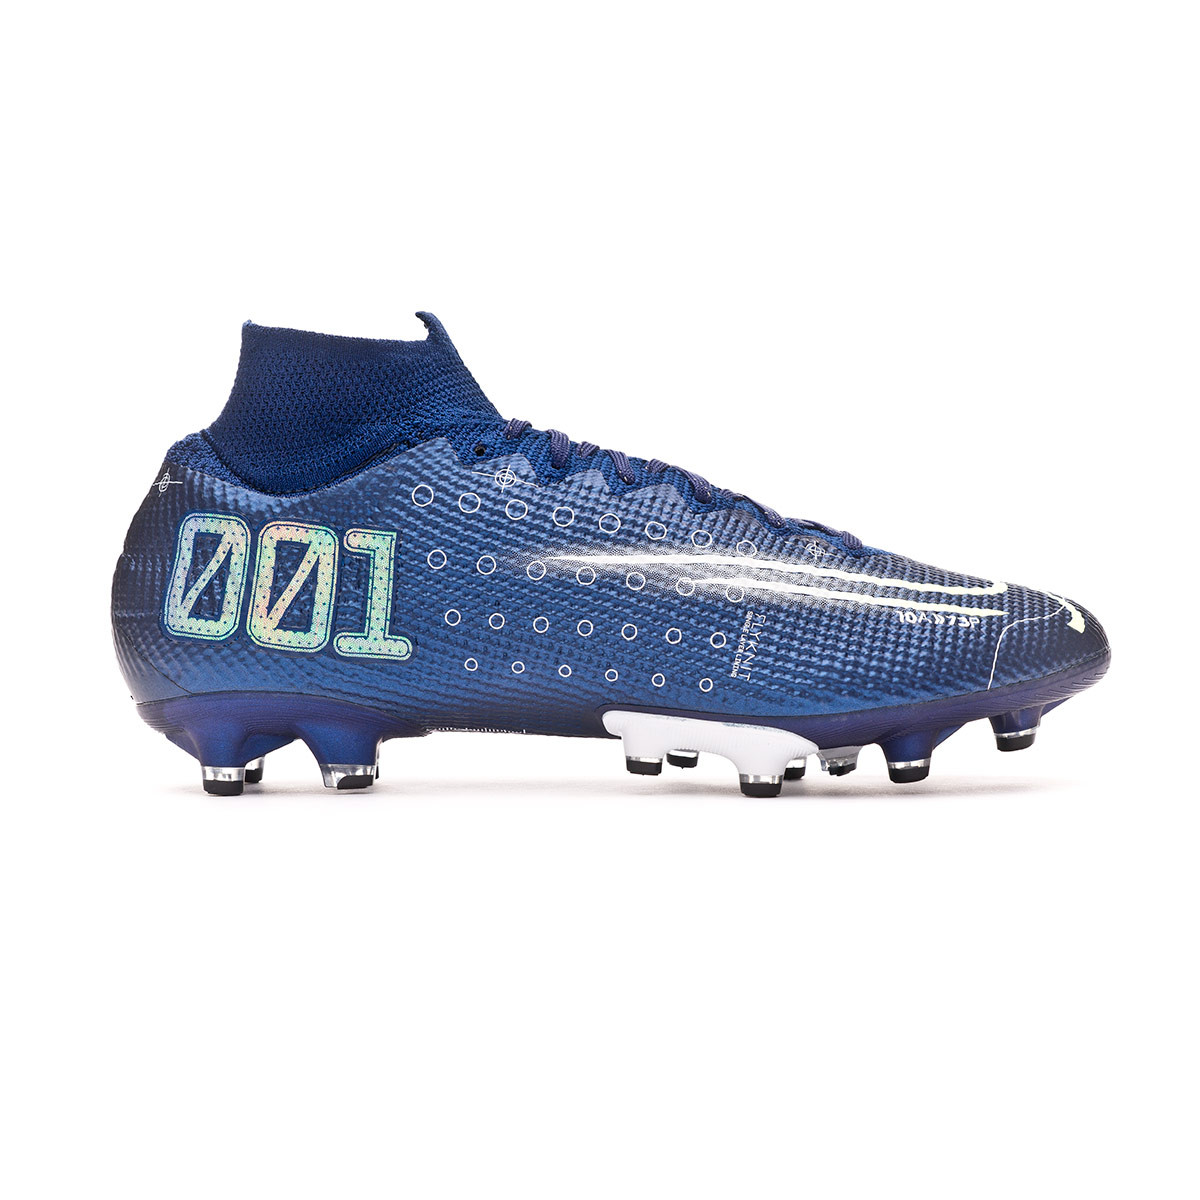 mds football boots